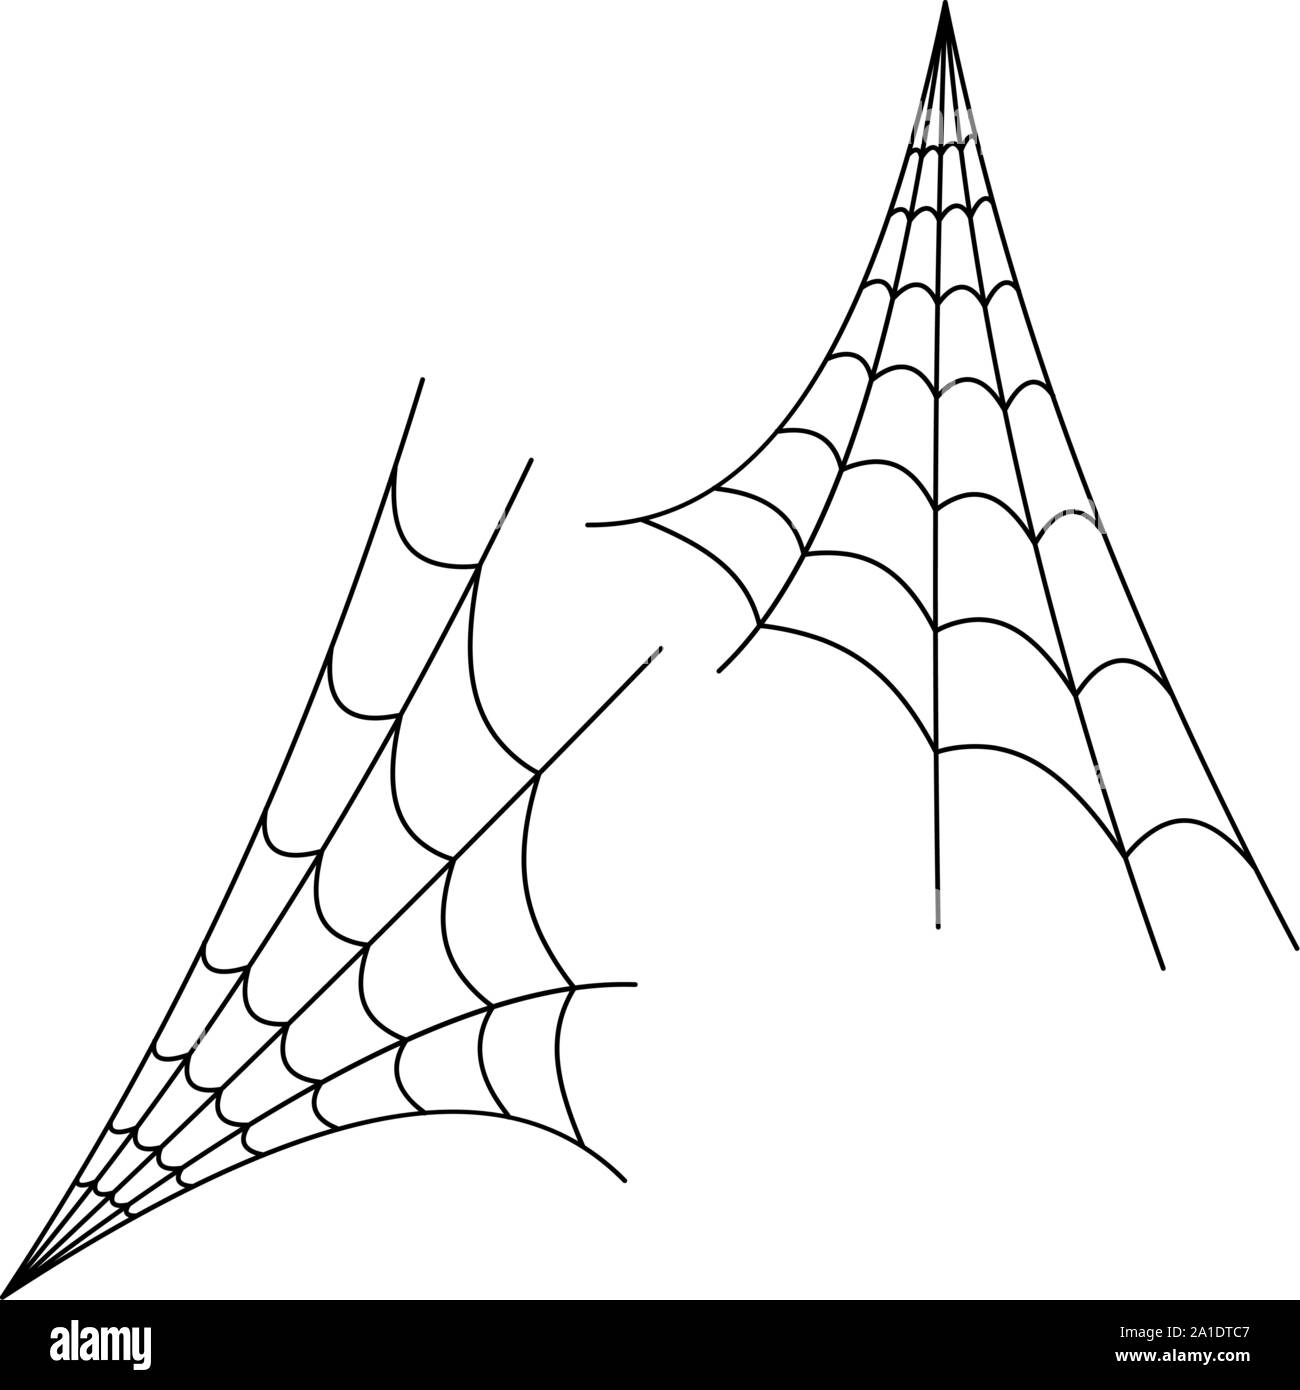 drawing of scary spider web on white background vector illustration